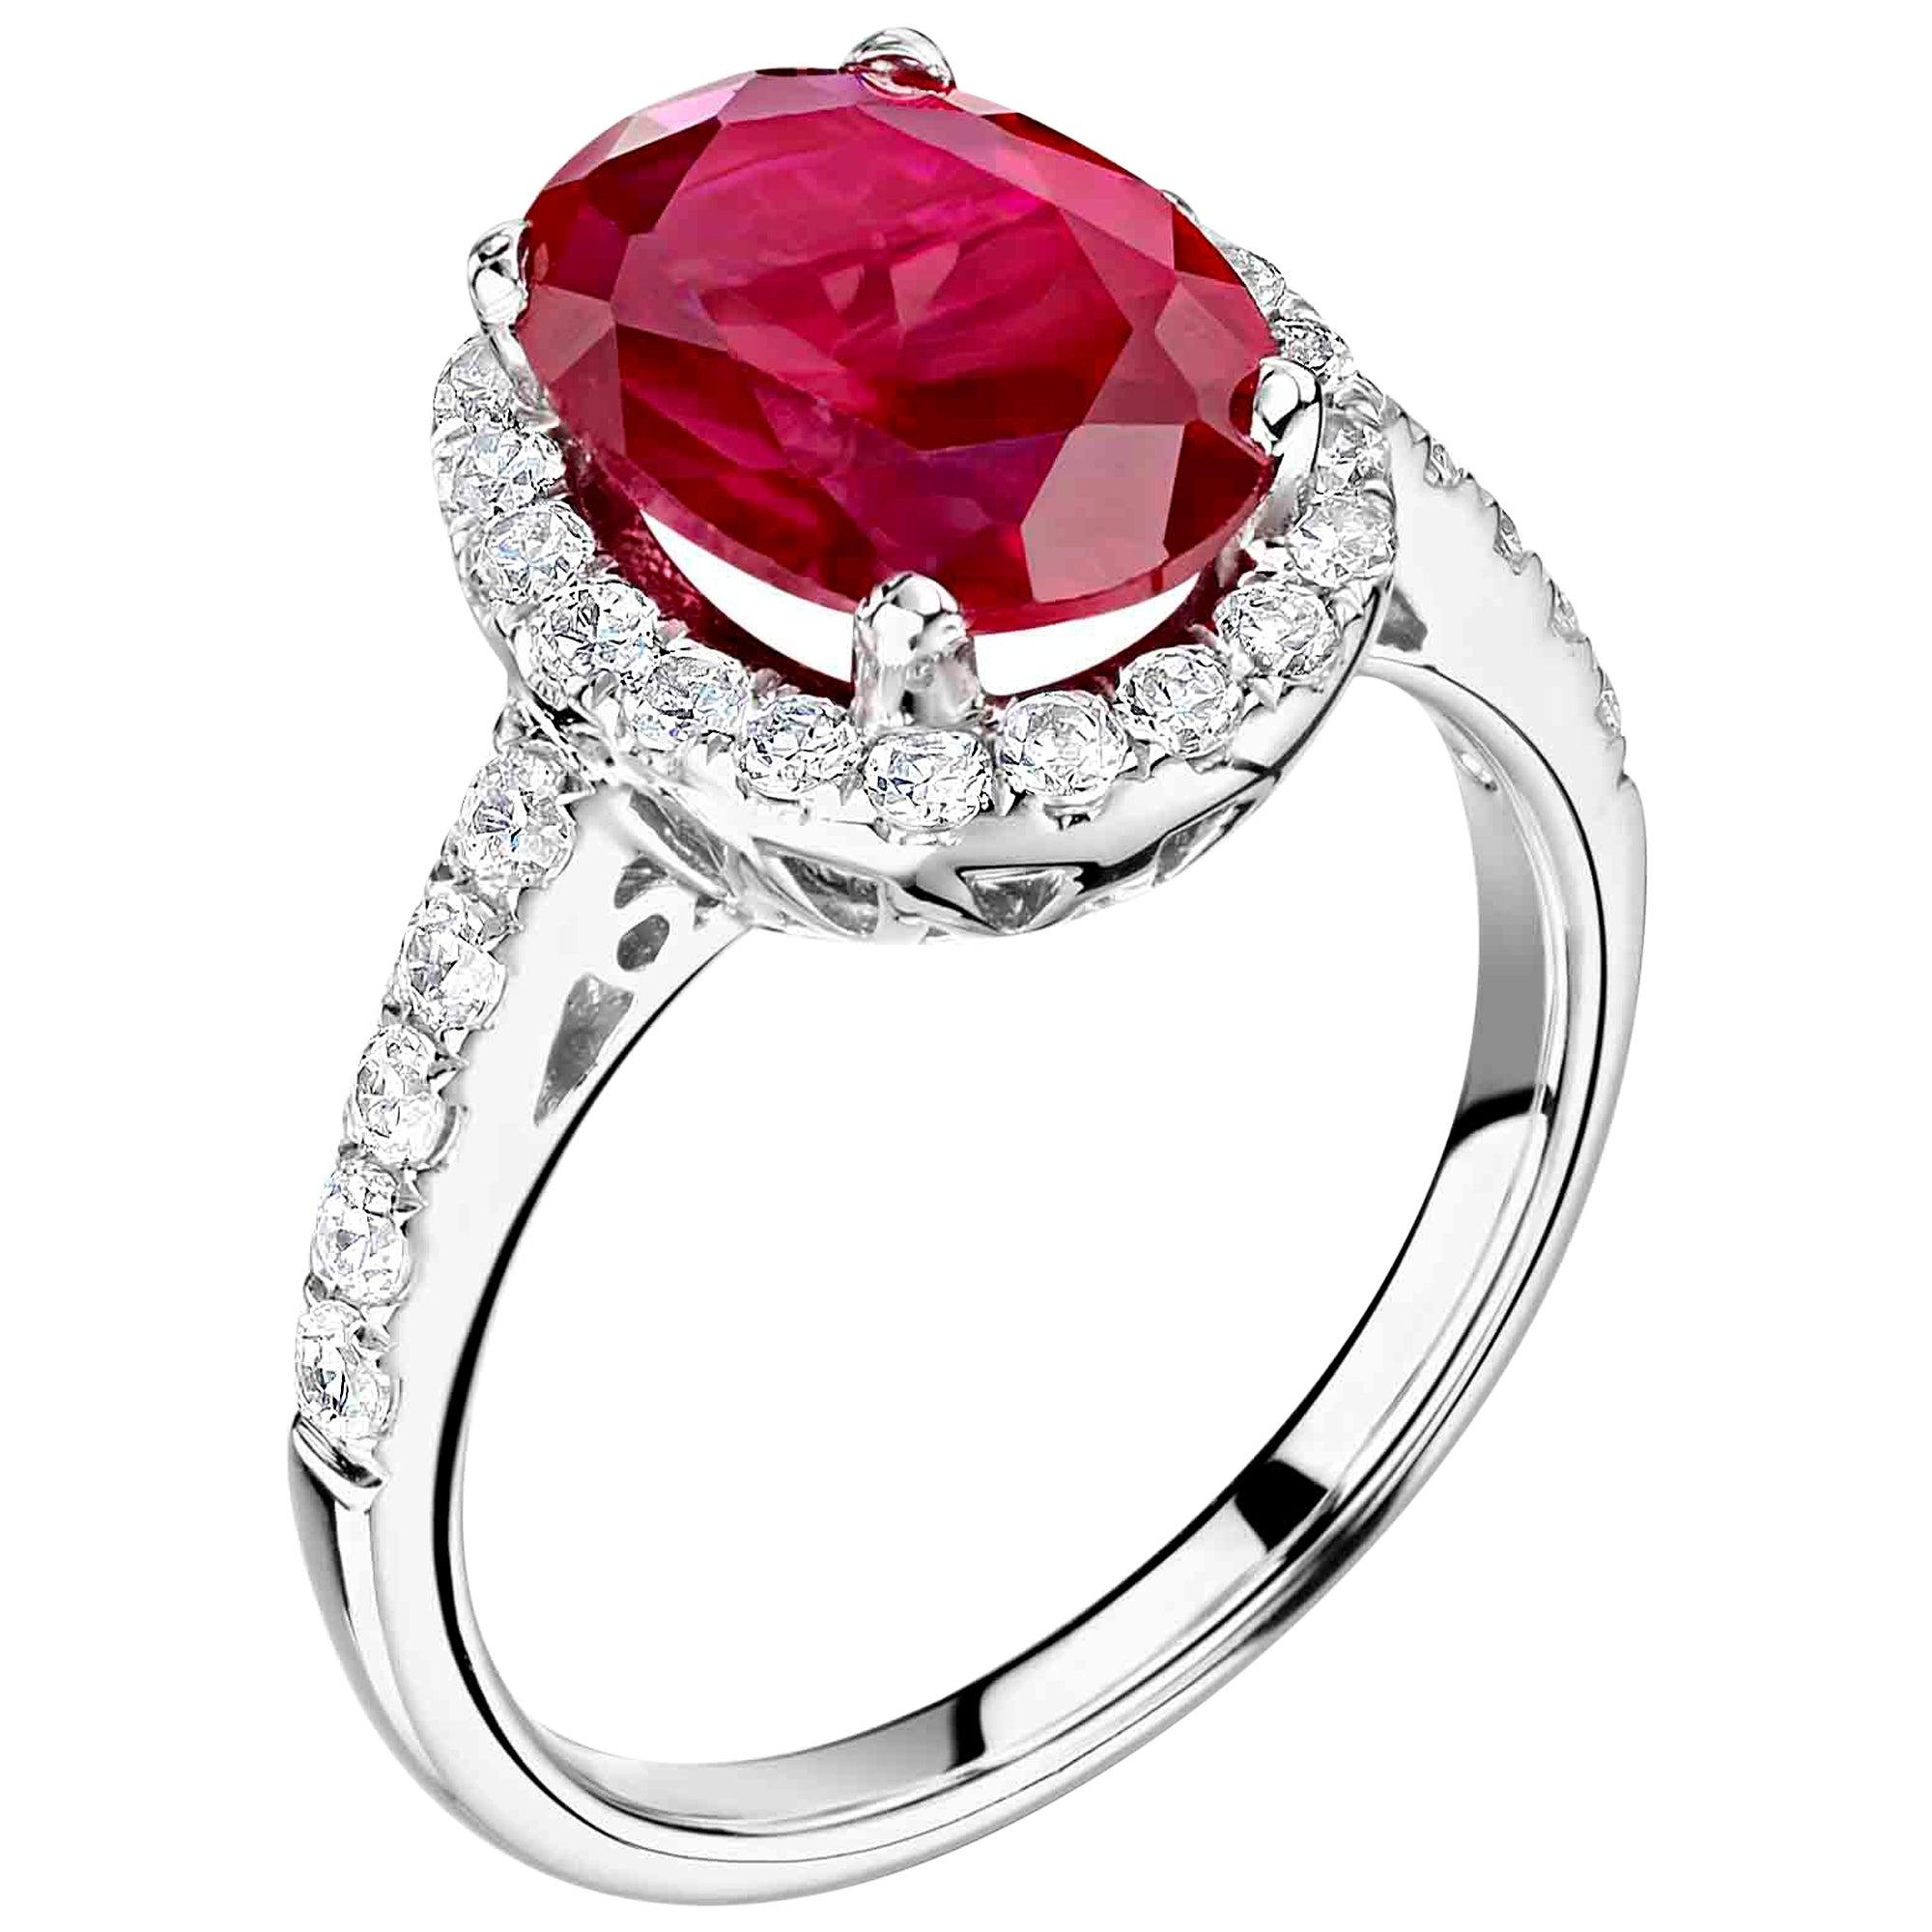 Ideal as an engagement or cocktail ring, this is an example of a bespoke design featuring a diamond halo and diamond flanks.  It is available in 18K white gold or platinum 950.  The centre stone is a ruby and we would recommend one of between 1-2